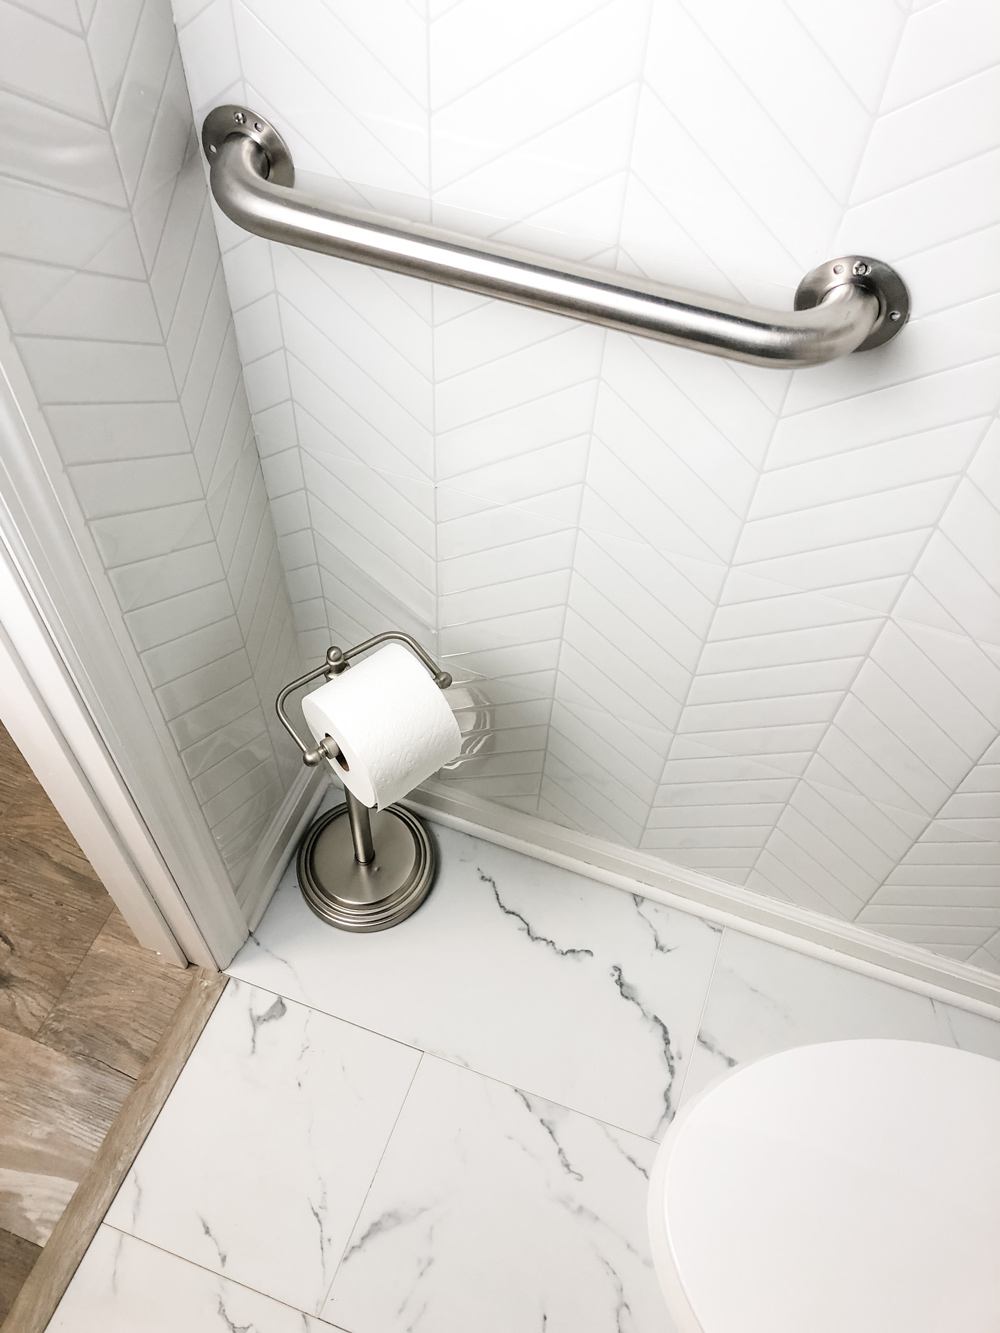 ADA Grab bar featured with peel and stick wall tile.